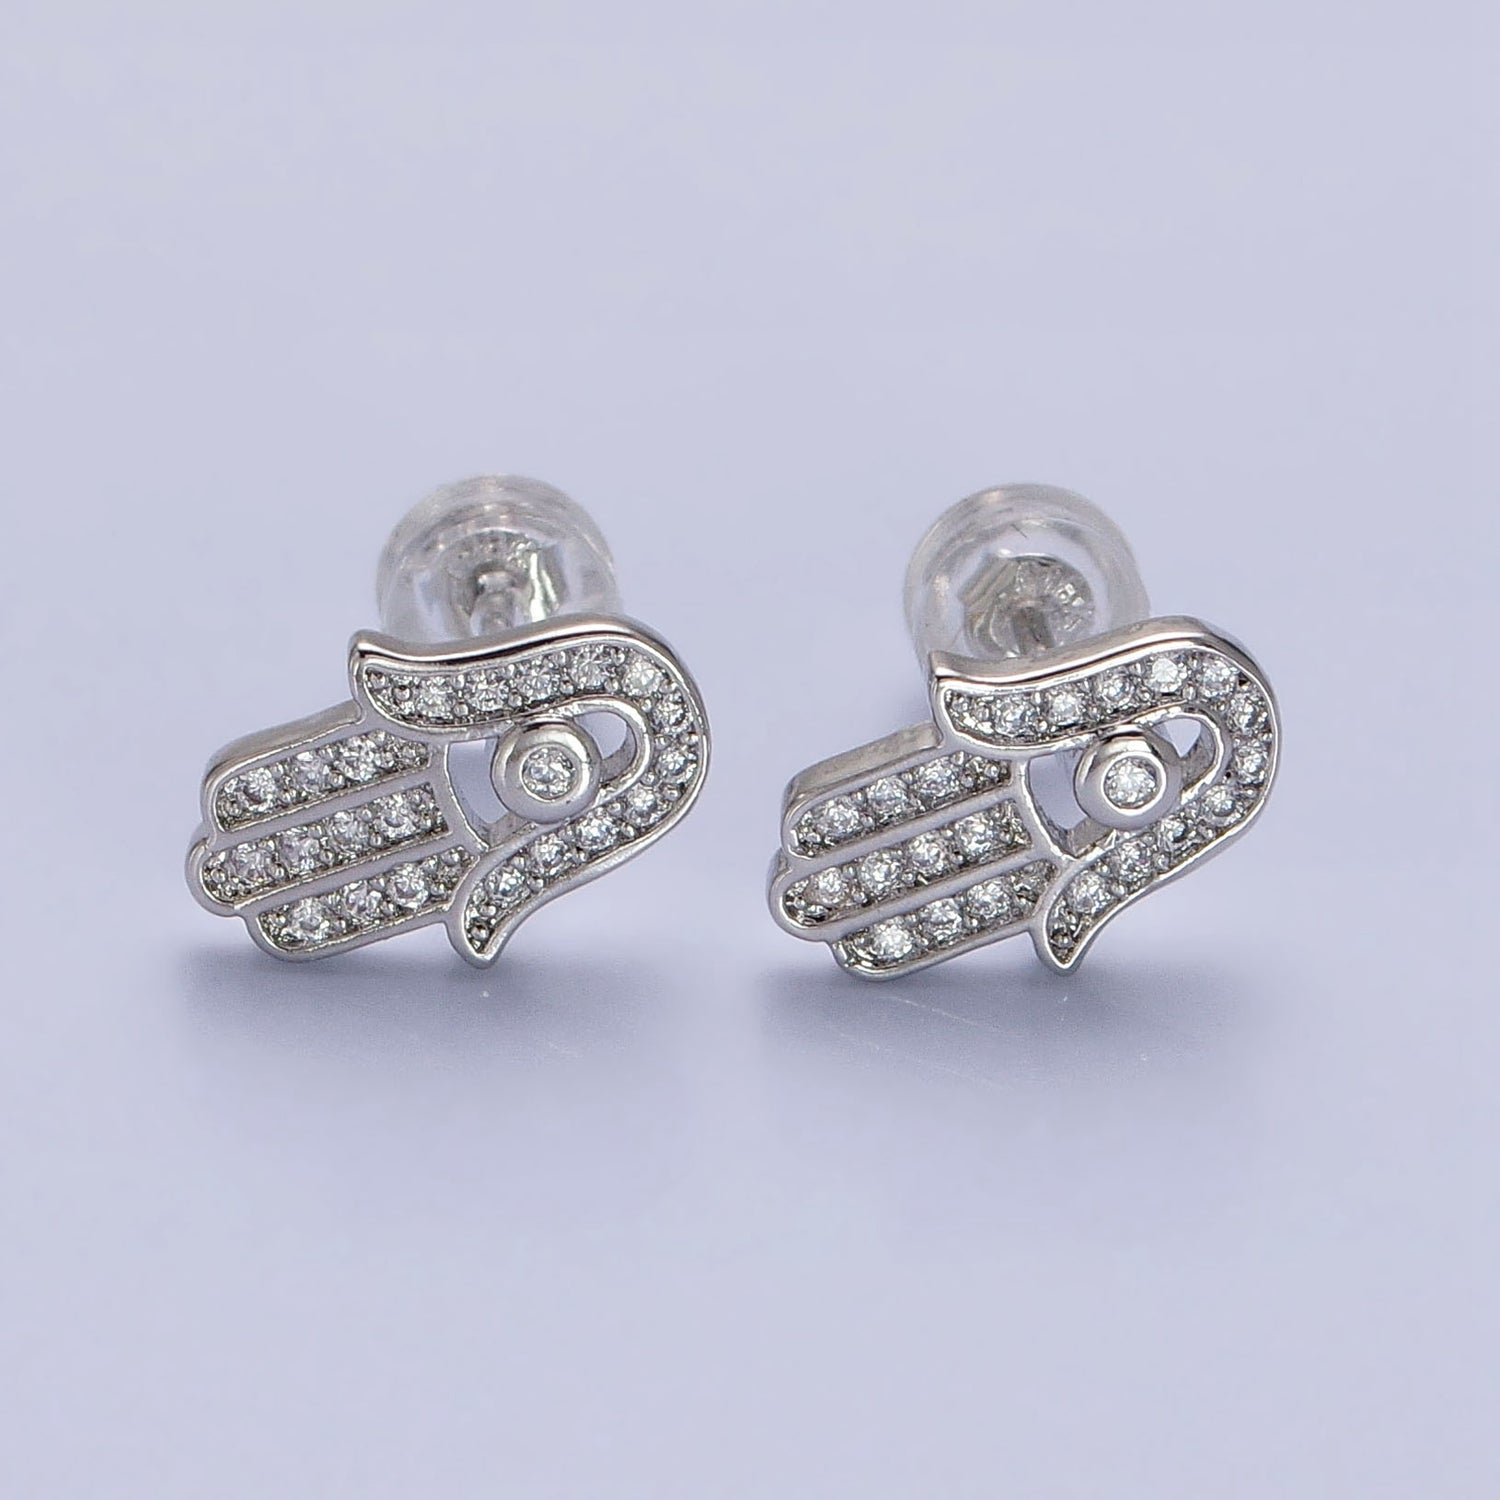 Gold, Silver Micro Paved Clear CZ Protection Hamsa Hand Evil Eye Stud Earrings | AB1012 AB1013